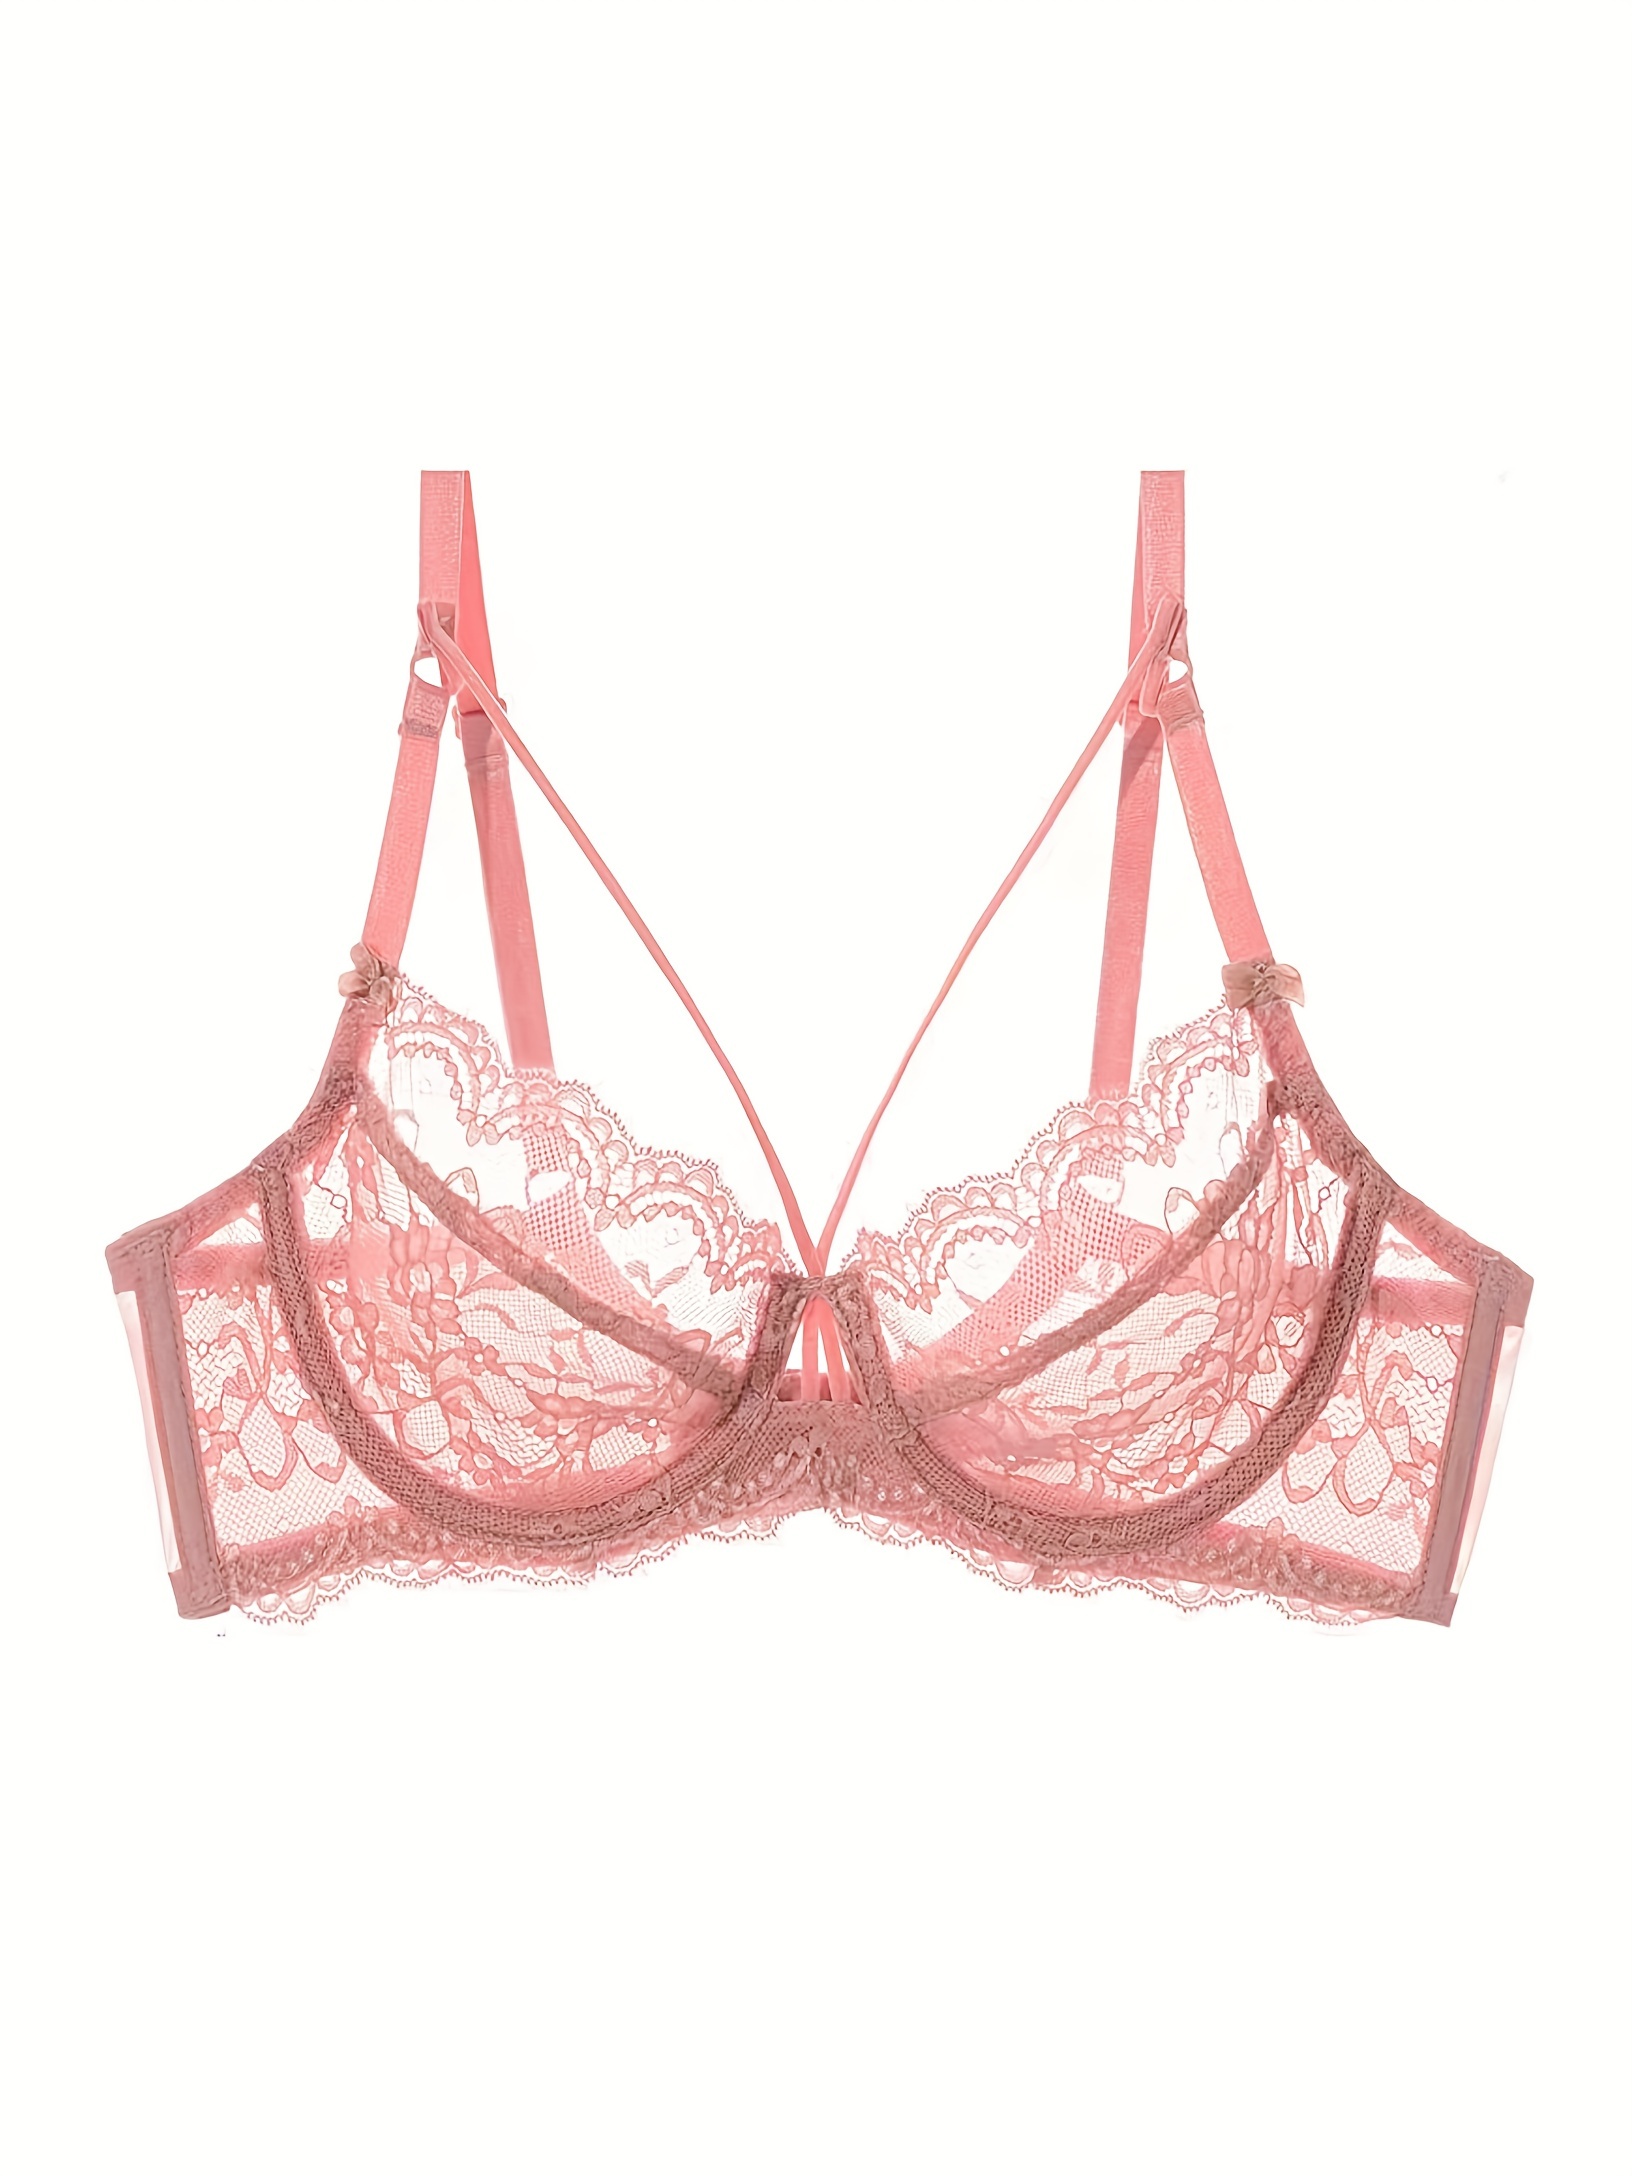 Victoria's Secret Neon Peony Pink Lace Unlined Non Wired Corset Bra Top